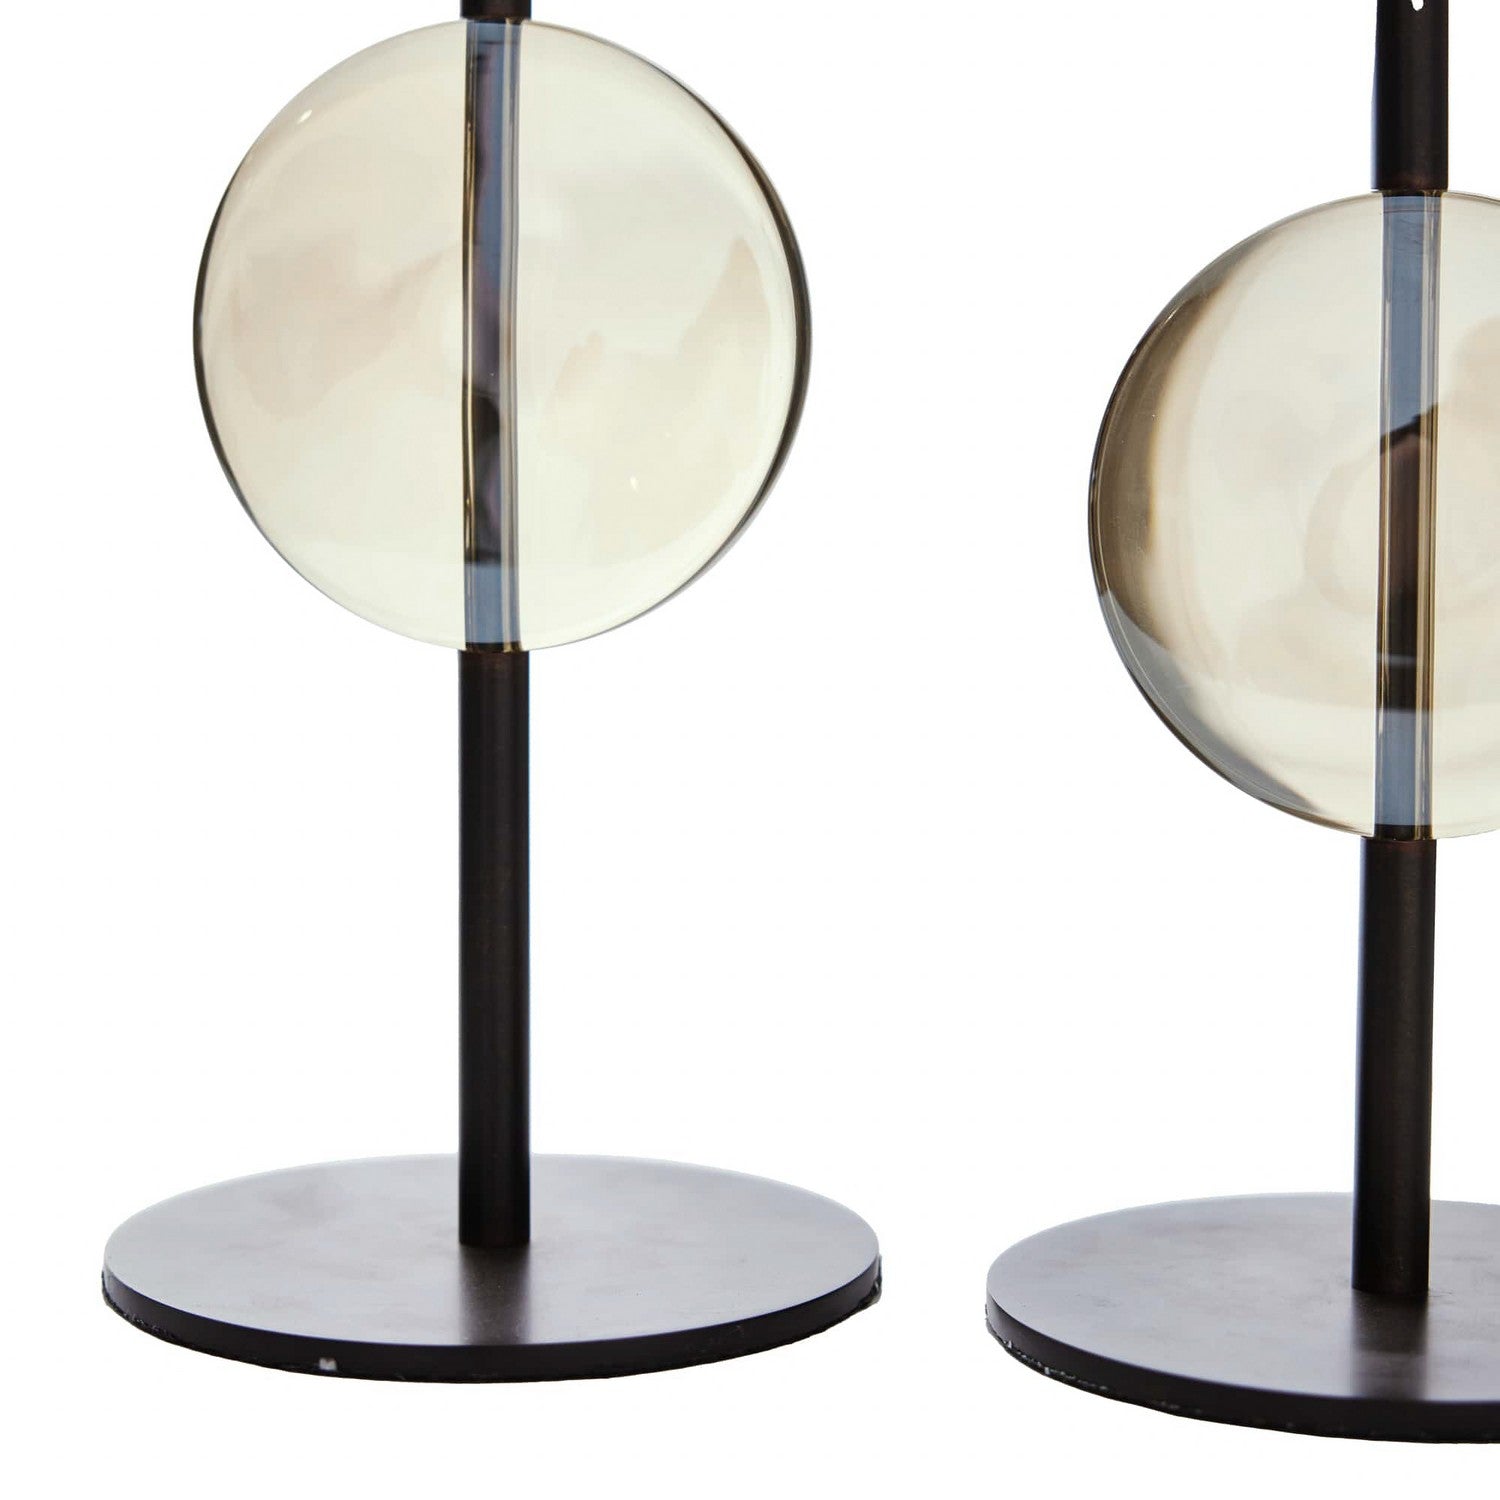 Candleholders, Set of 2 from the Terrell collection in Champagne finish